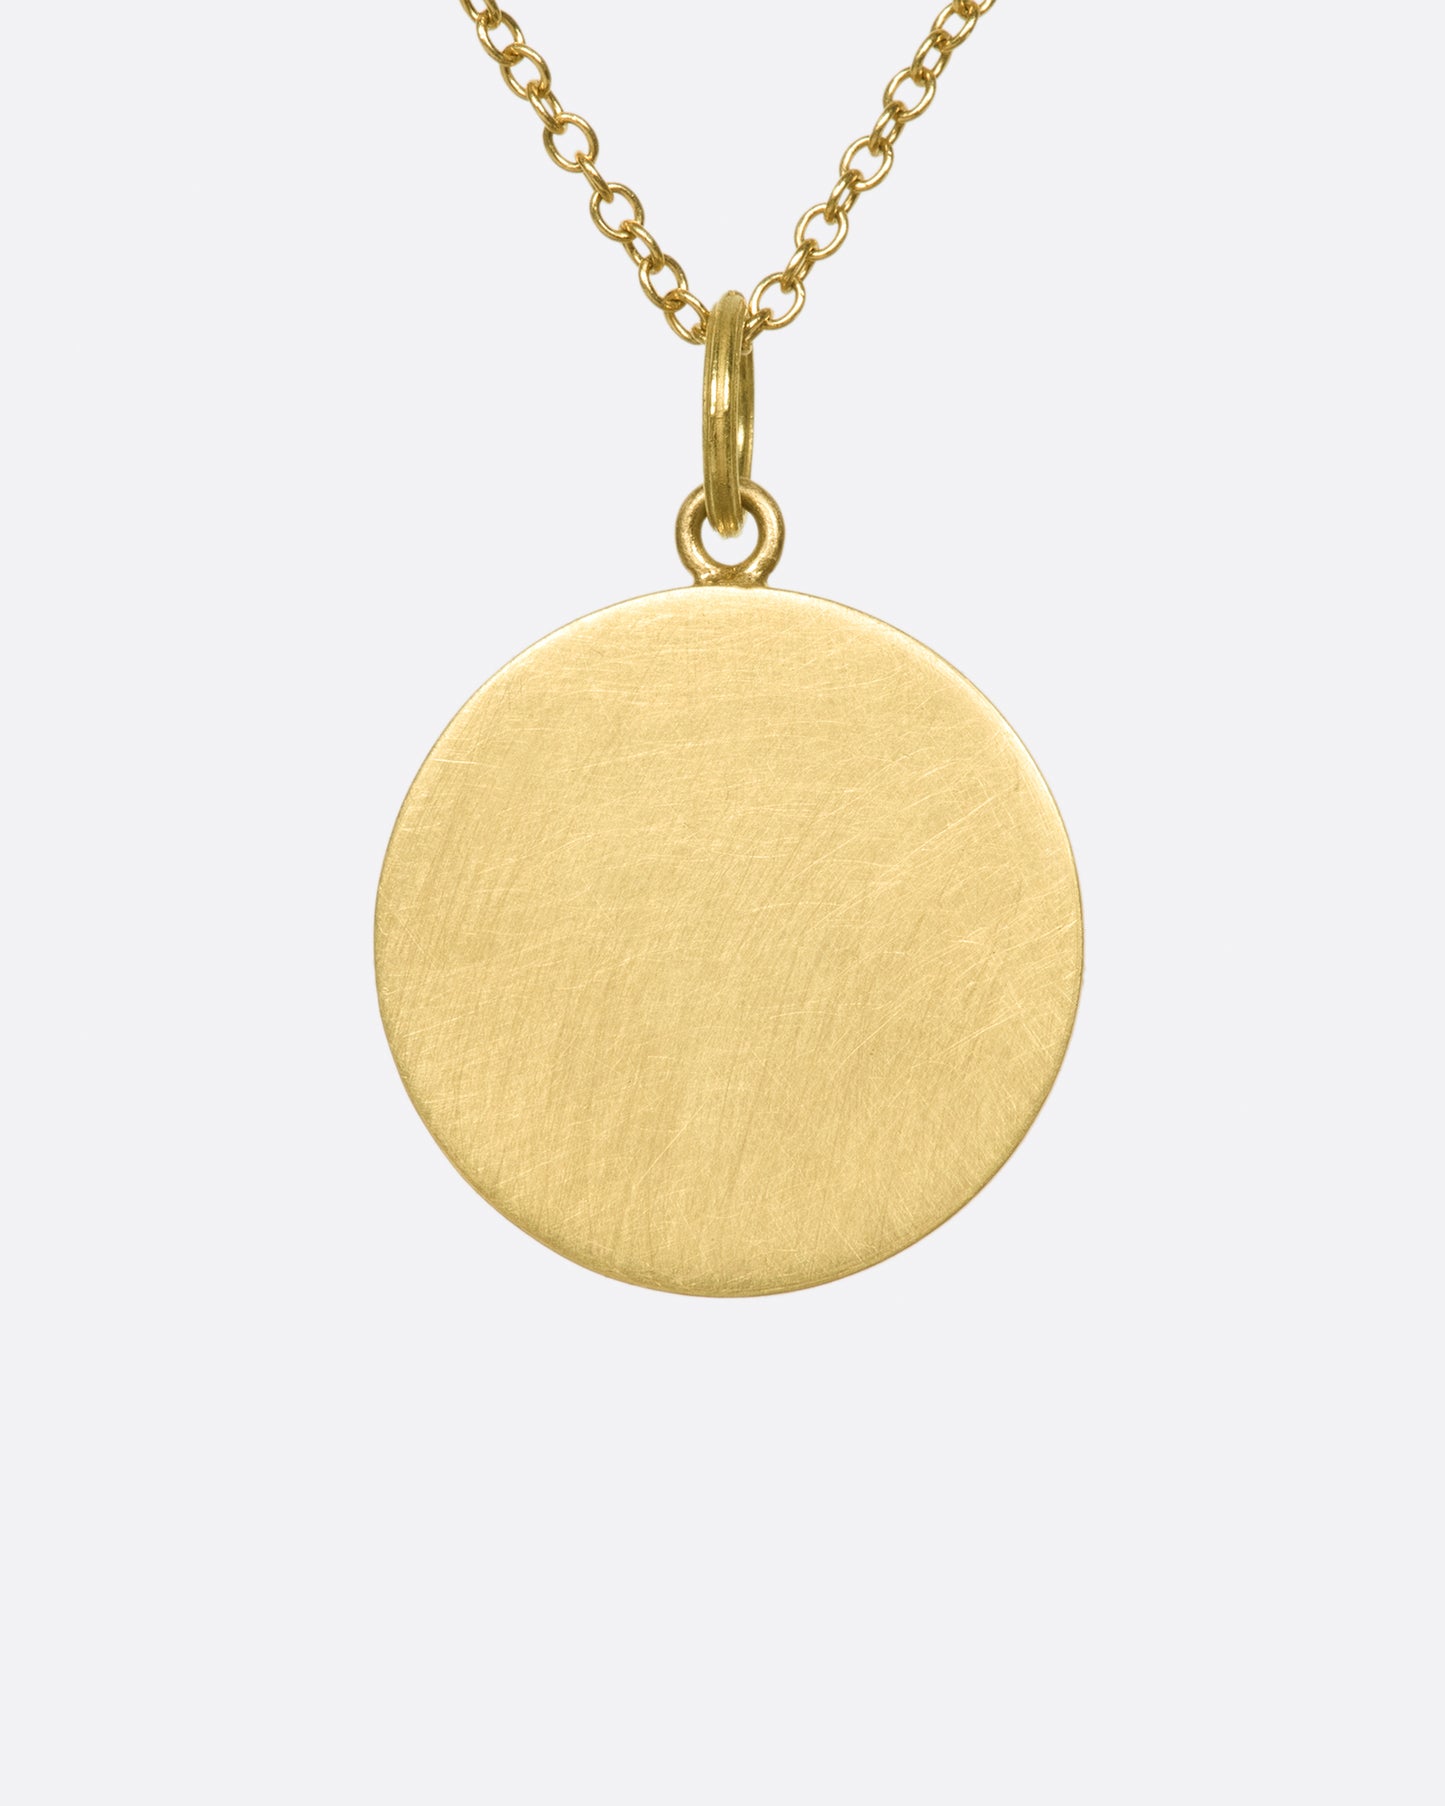 A solid, heavy pendant with a striking, sensual design with a sense of humor.